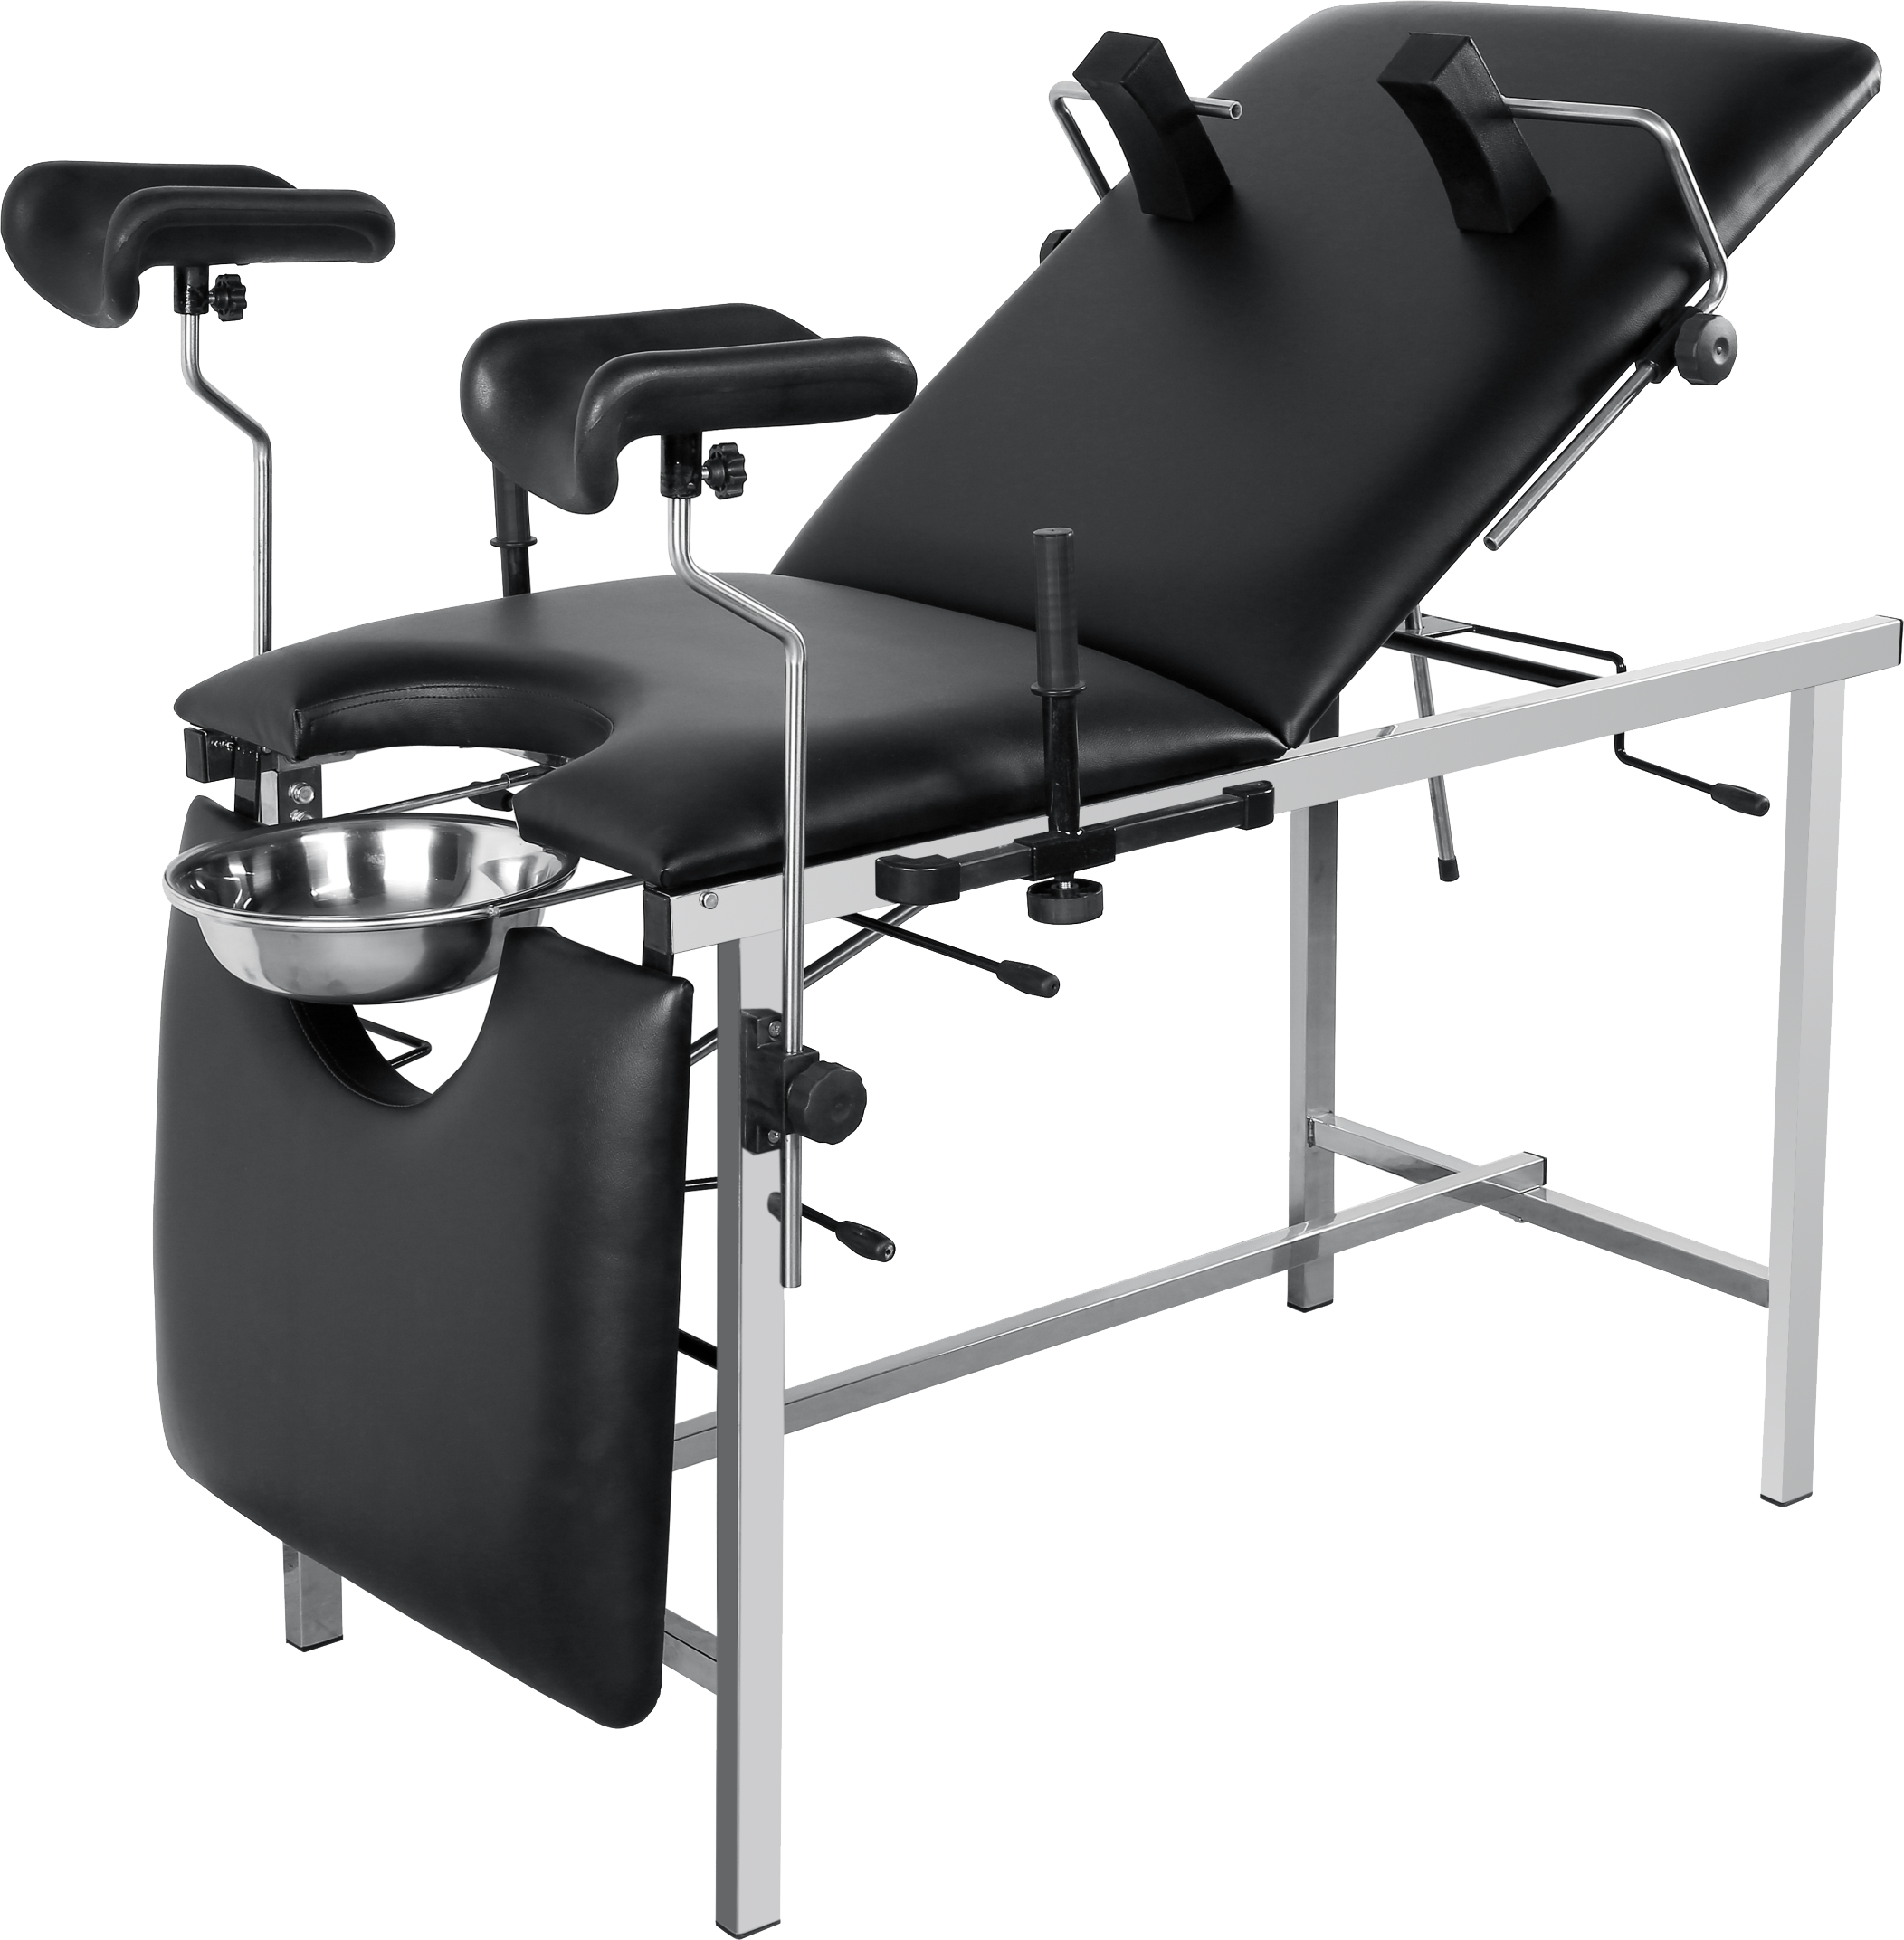 Hospital Examination Table Delivery Bed Gyno Exam Table For Gynecological